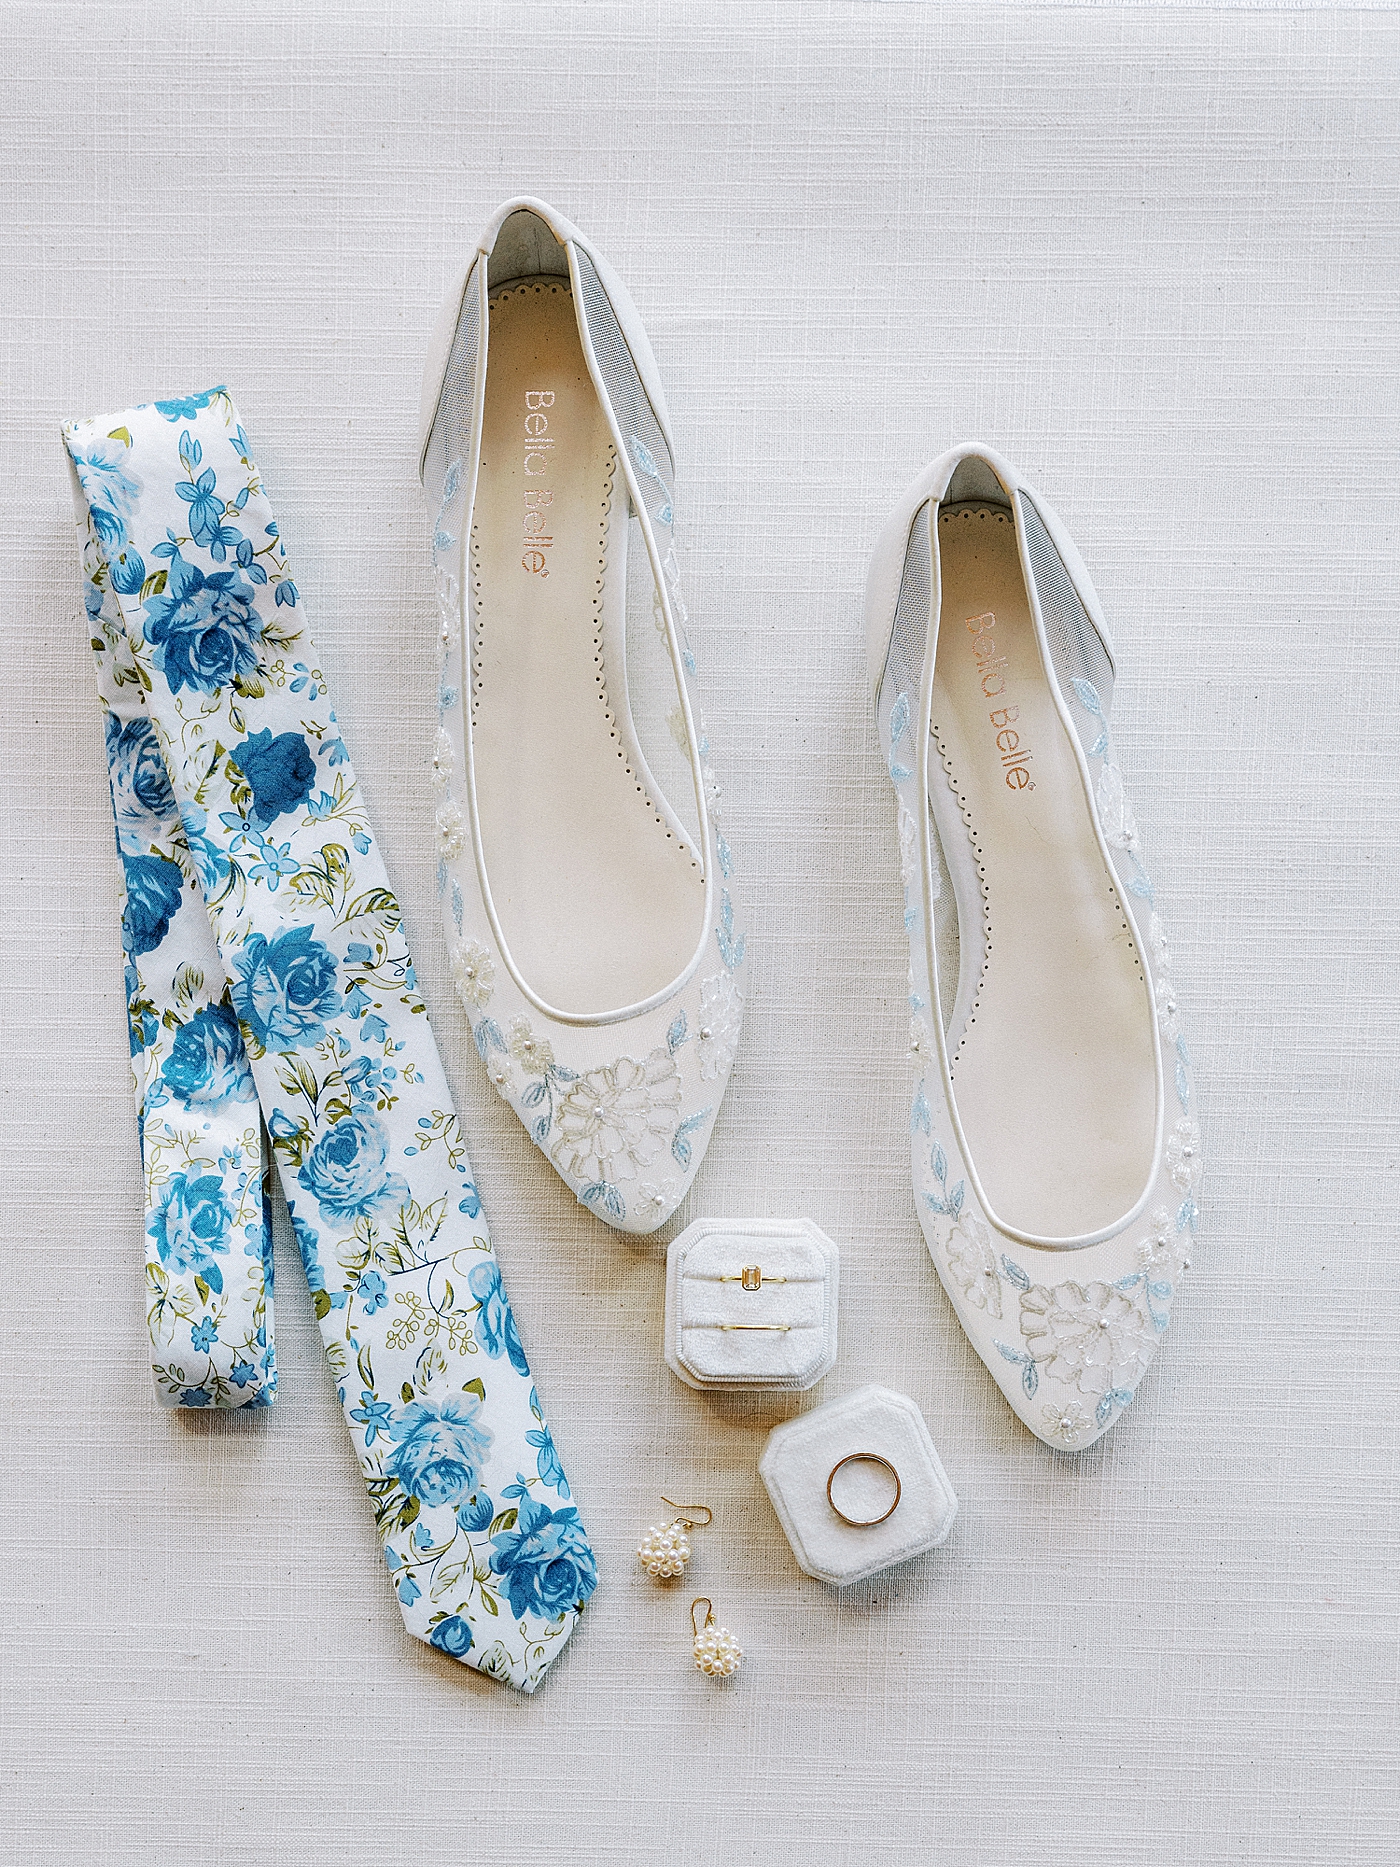 Bride and grooms wedding details styled together | Photo by Diane Sotero Photography